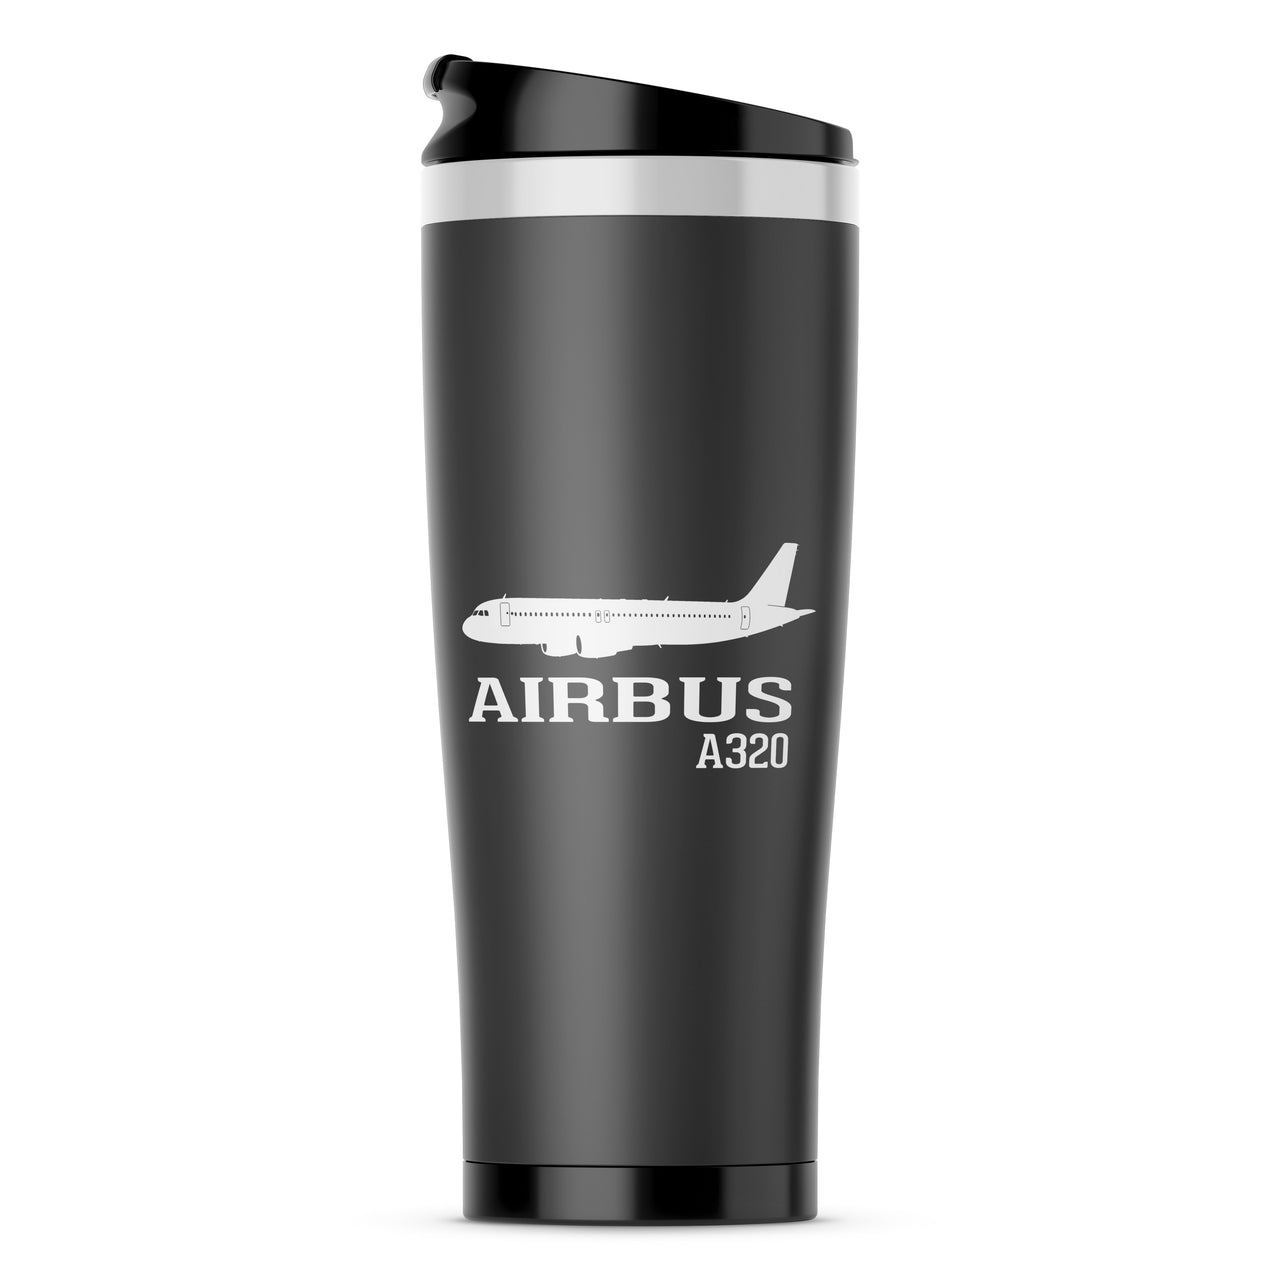 Airbus A320 Printed Designed Stainless Steel Travel Mugs